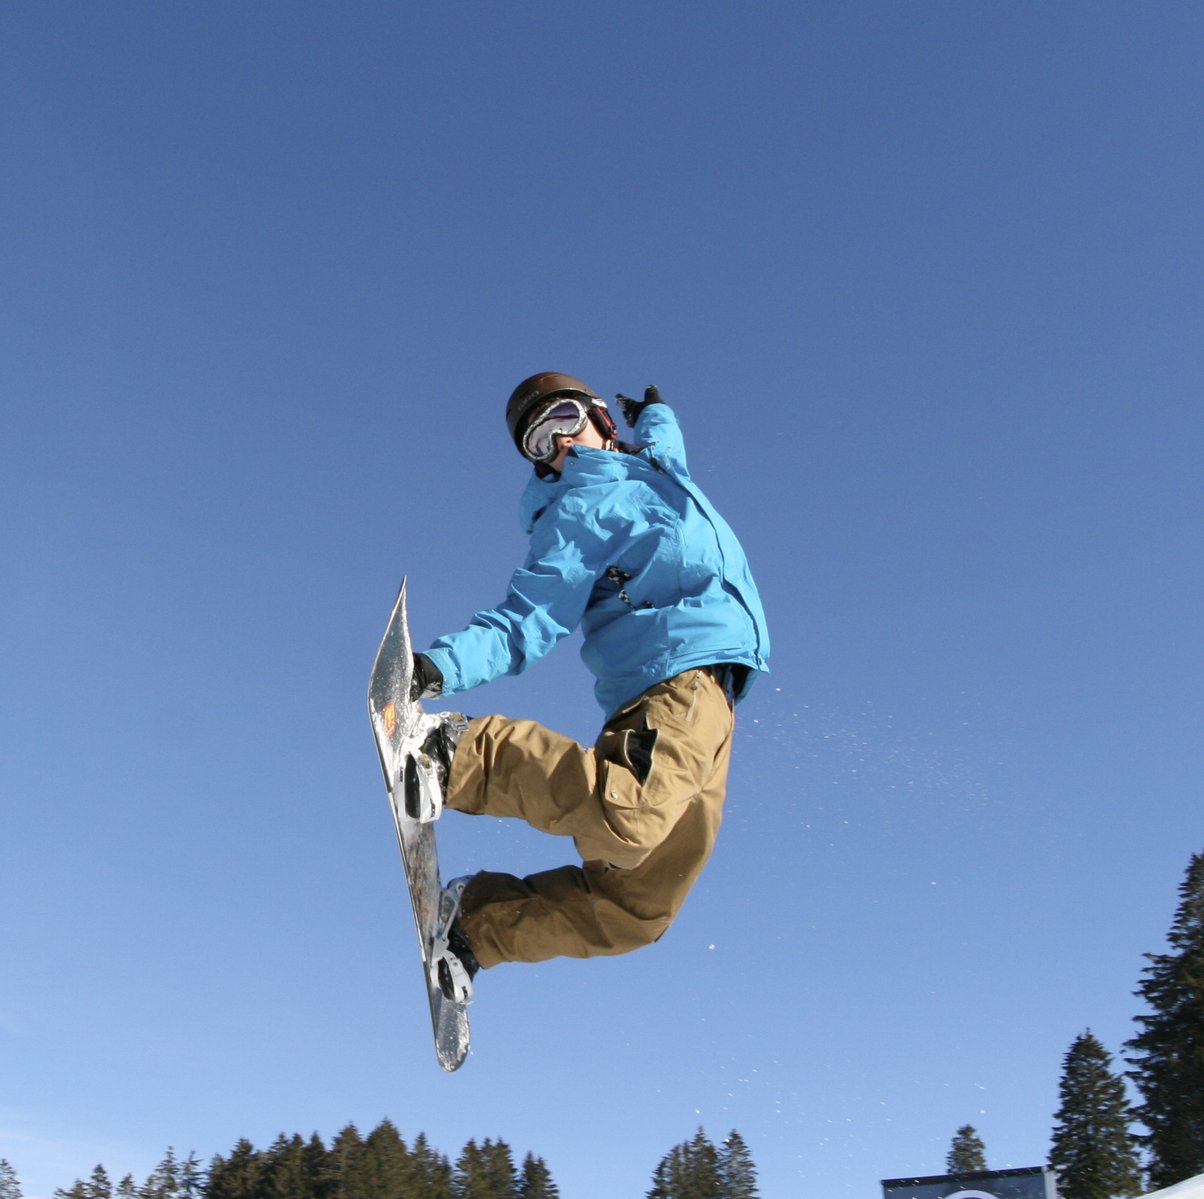 a snow boarder doing a flip on a sunny day